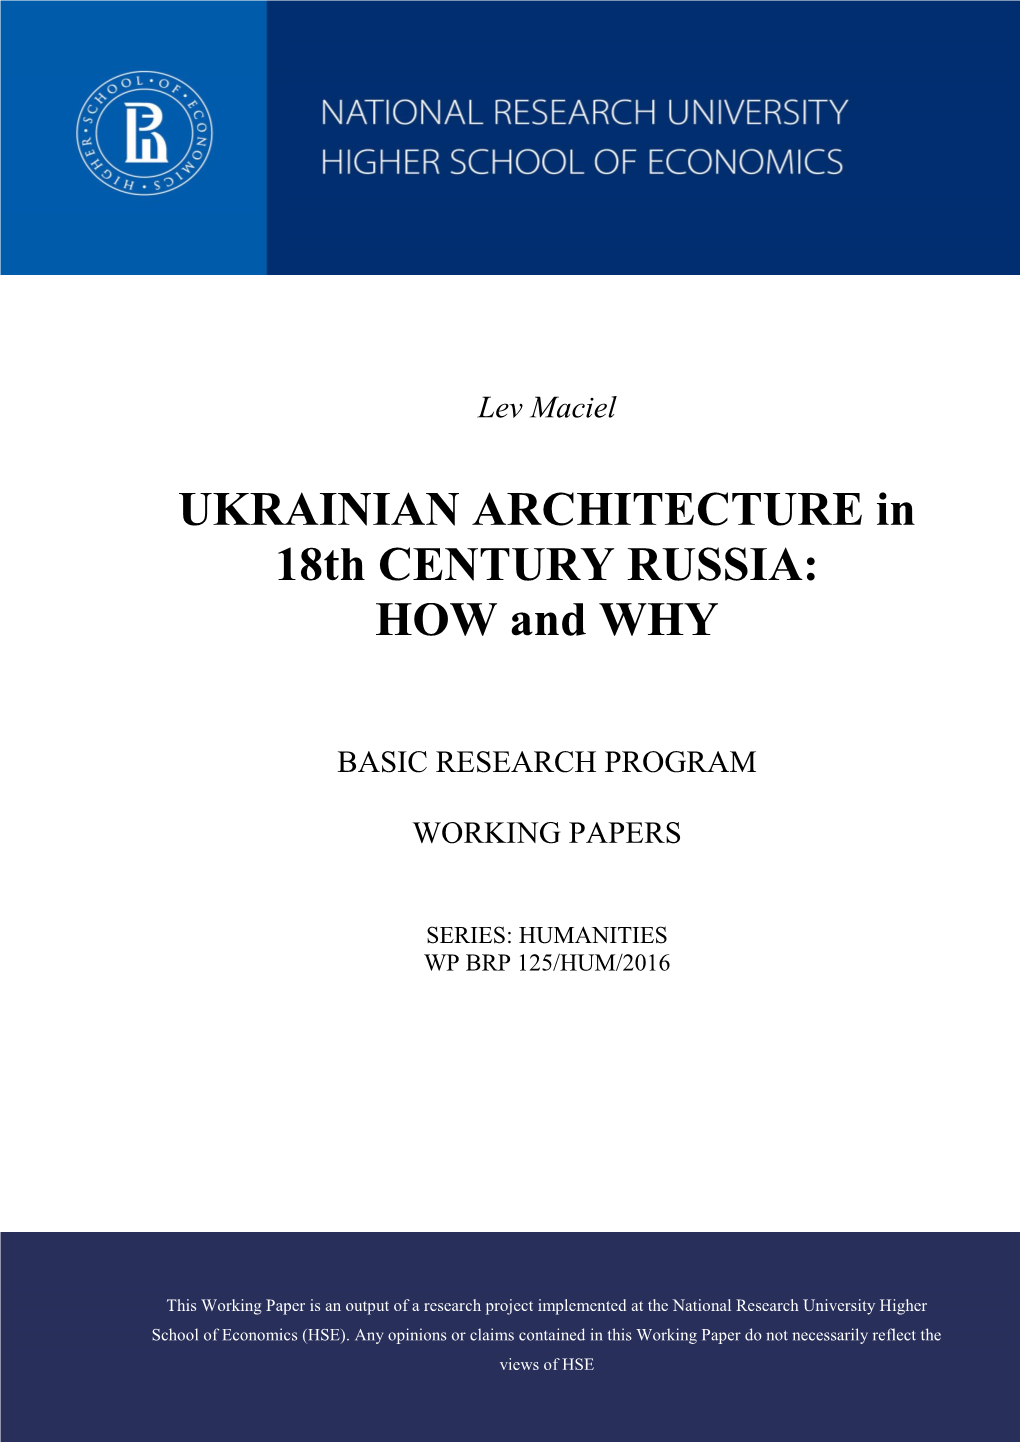 UKRAINIAN ARCHITECTURE in 18Th CENTURY RUSSIA: HOW and WHY